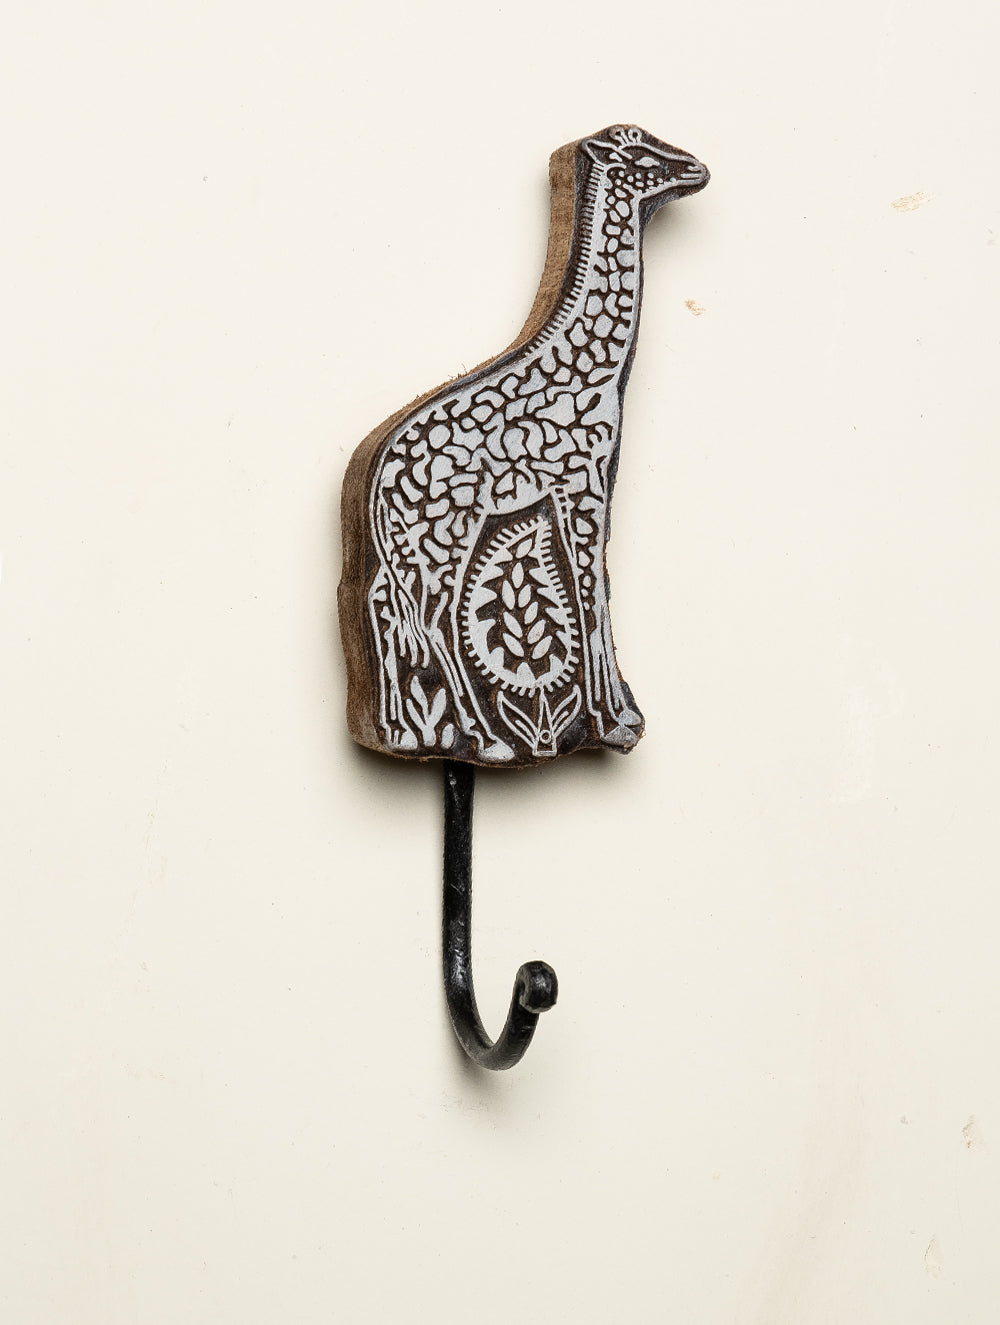 Load image into Gallery viewer, Wooden Engraved Wall Hook - Giraffe Motif - The India Craft House 